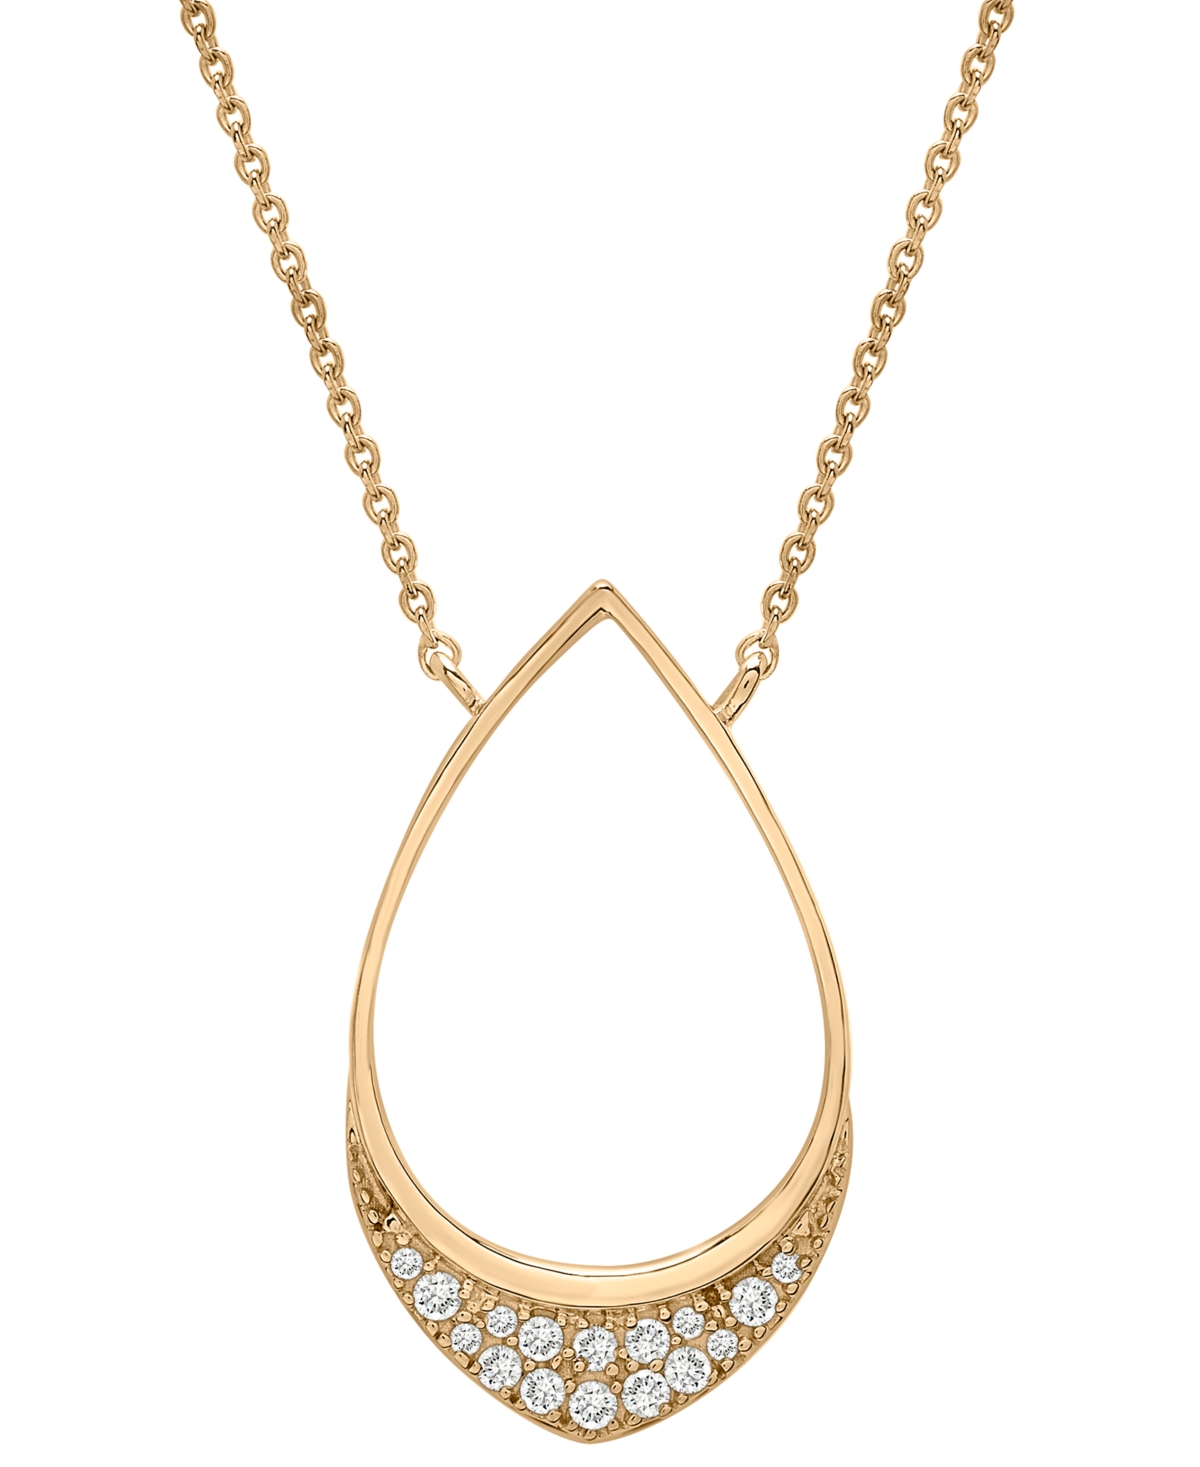 Diamond Teardrop Pendant Necklace (1/10 ct. t.w.) in 14k Gold, 17" + 2" extender, Created for Macy's - Yellow Gold